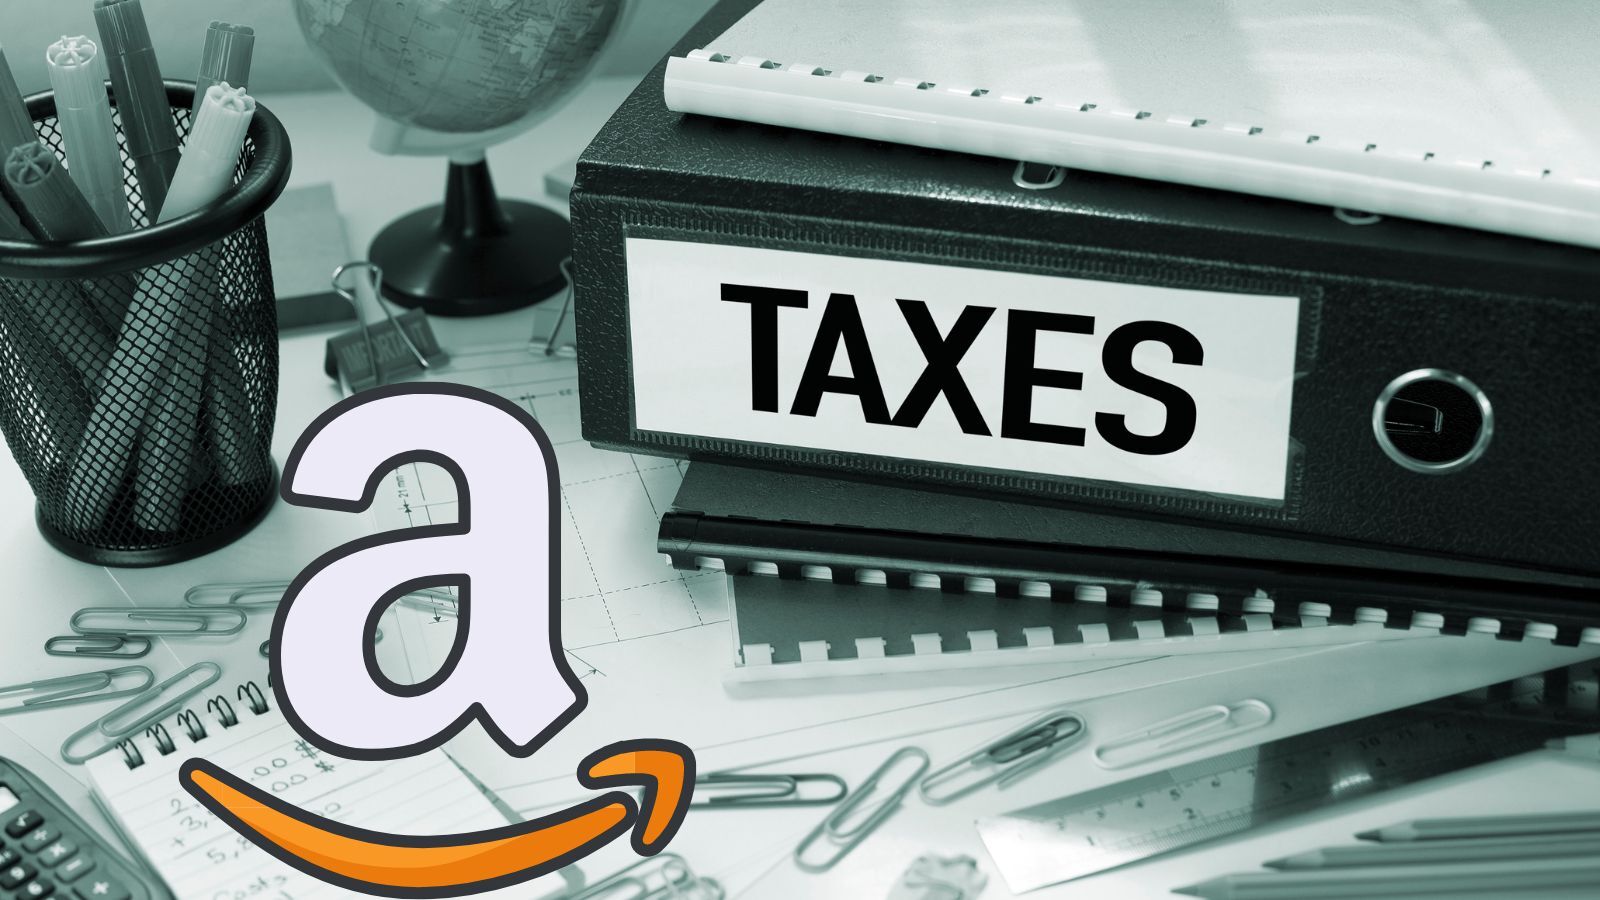 Does Amazon Pay Taxes? (Something You Might Be Interested In)